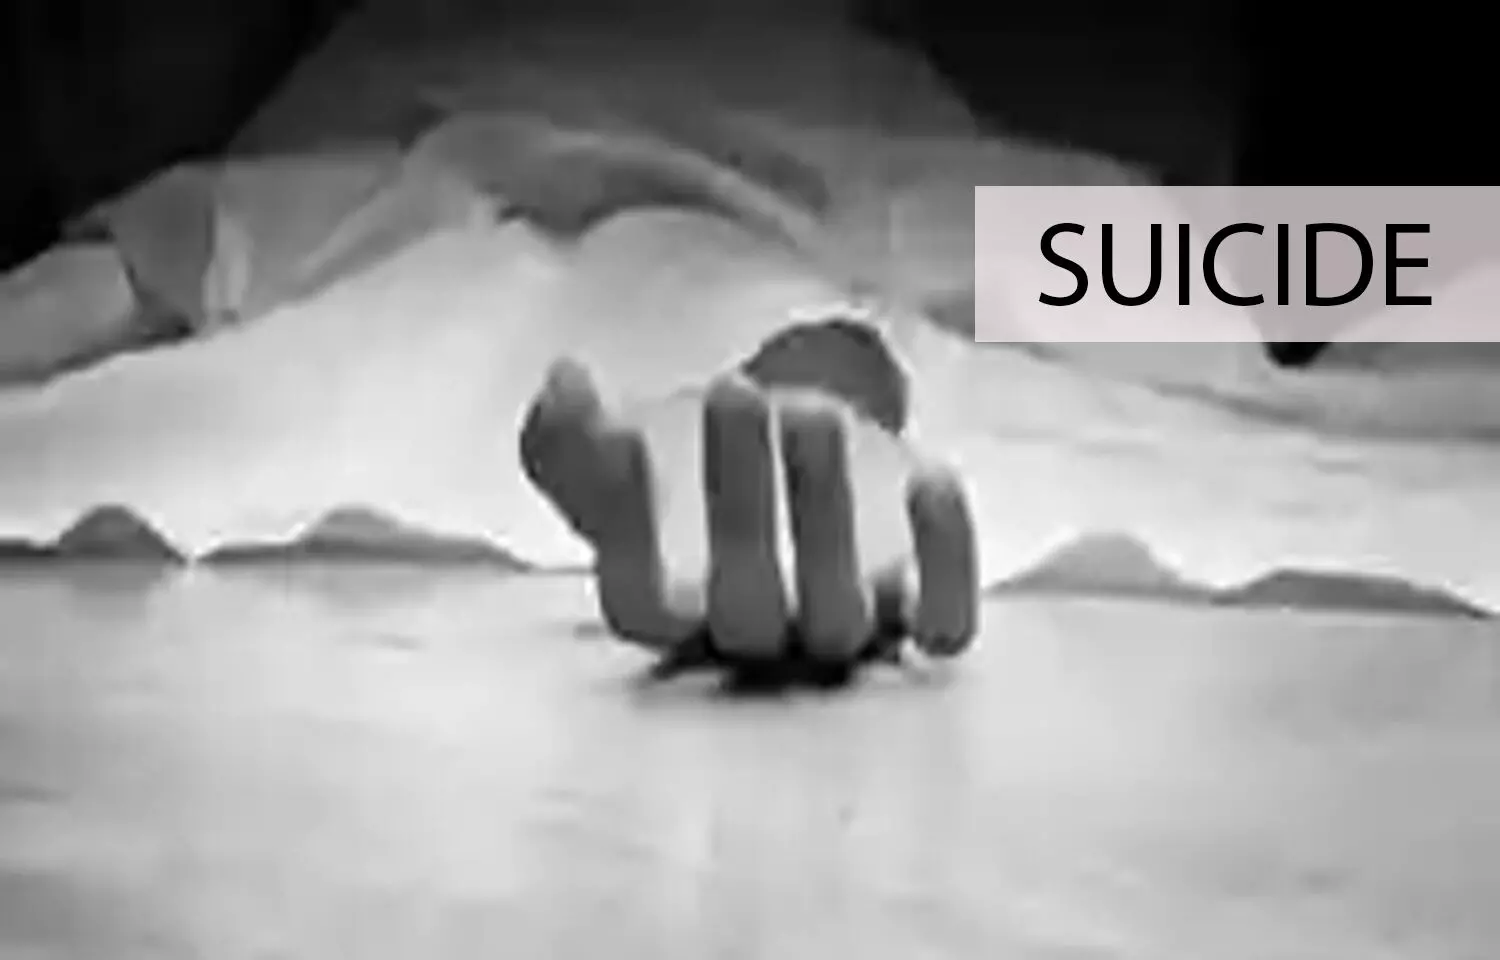 Odisha: First Year MBBS Student Dies After Falling From Hostel Roof, Family alleges ragging